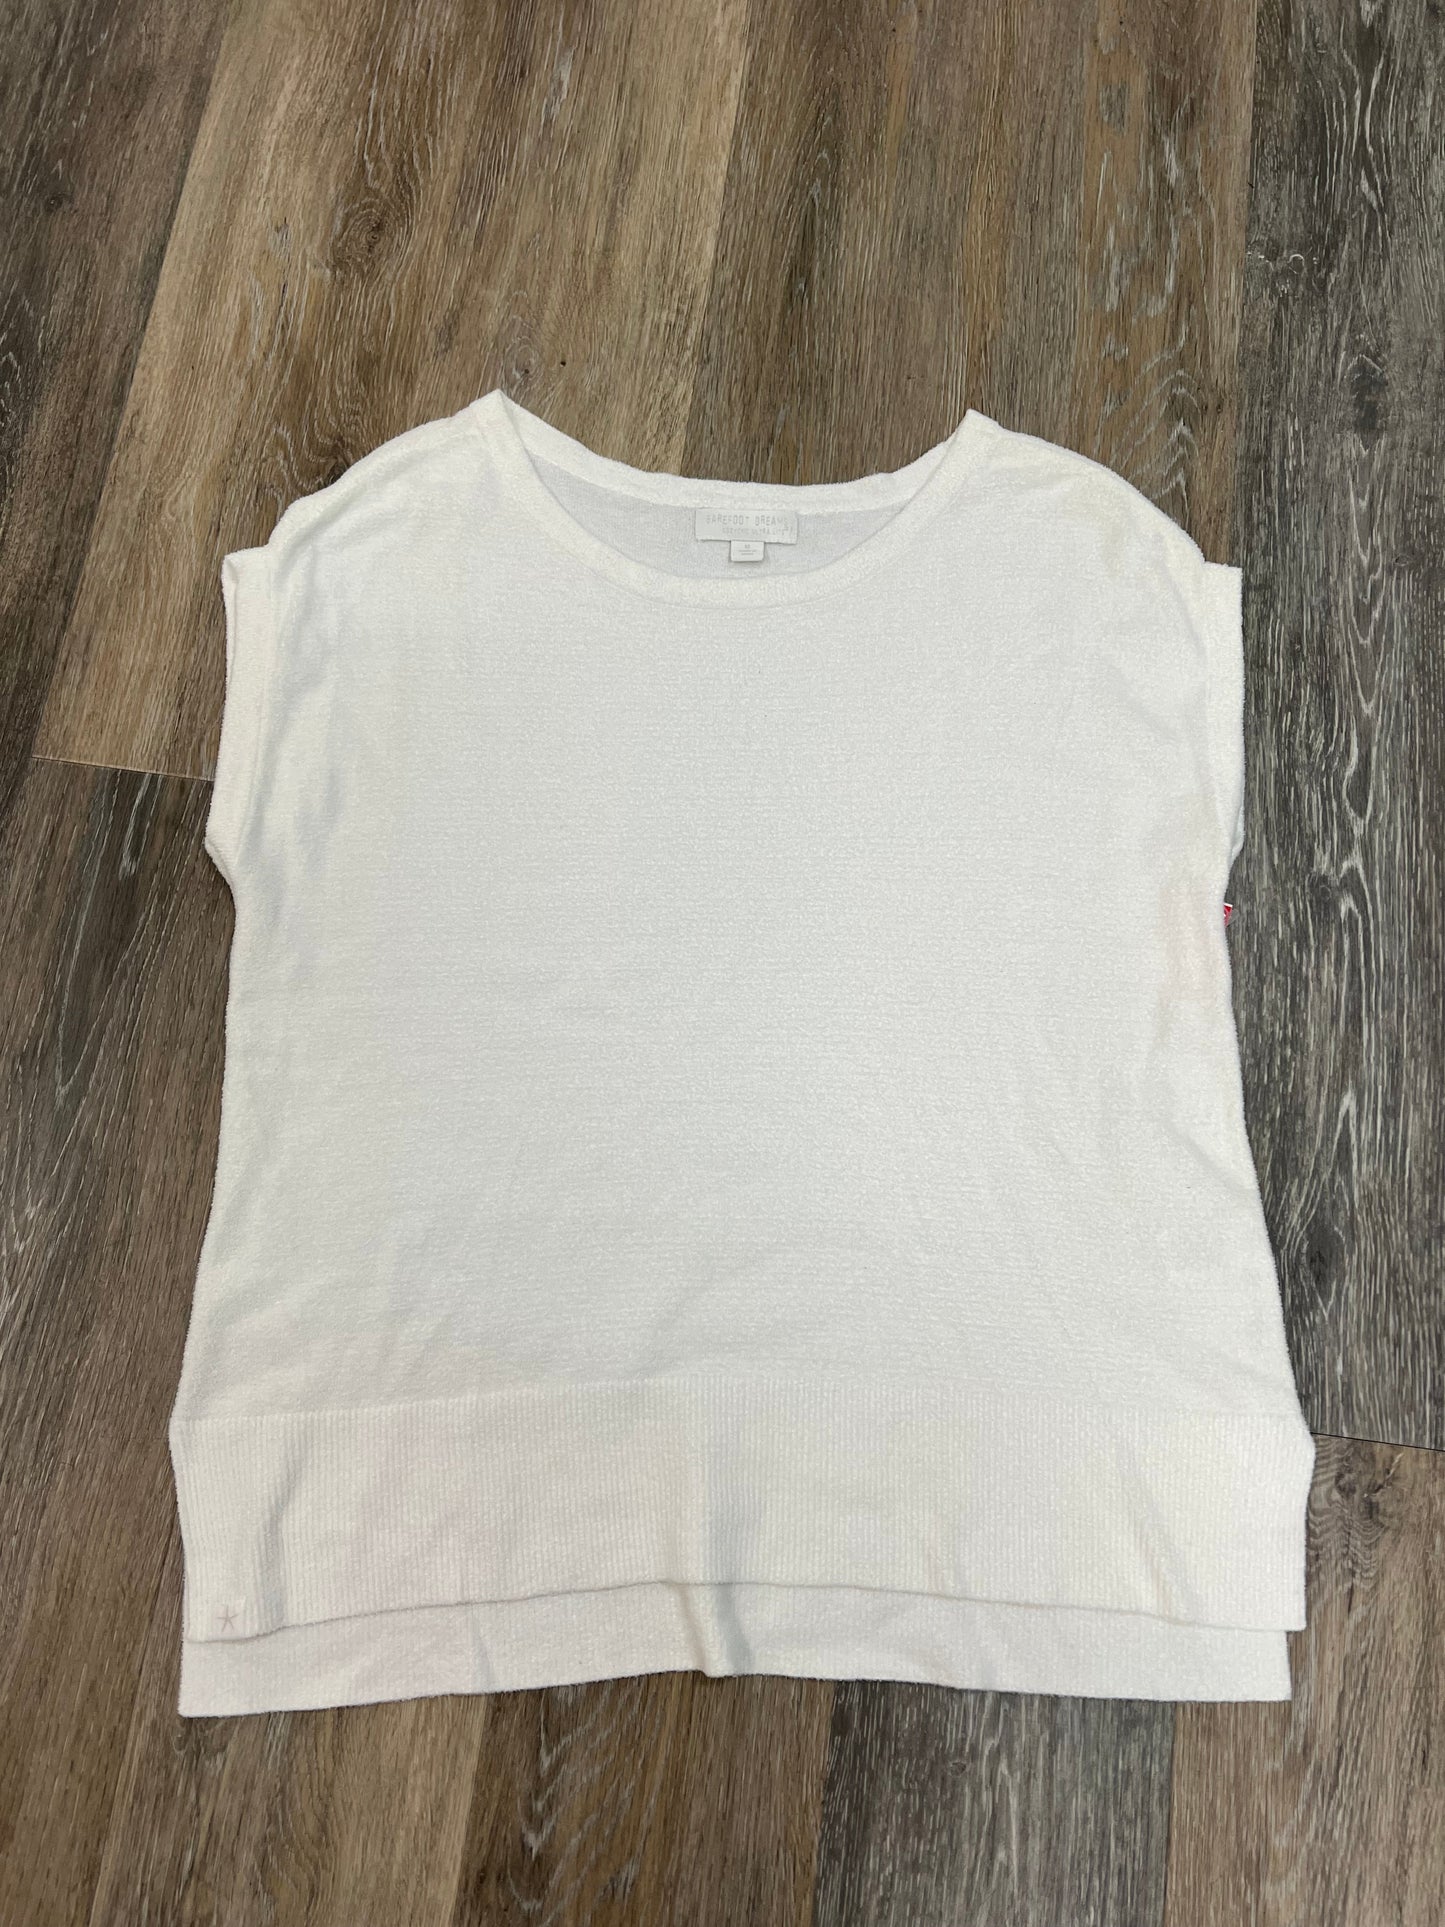 White Top Sleeveless Barefoot Dreams, Size M